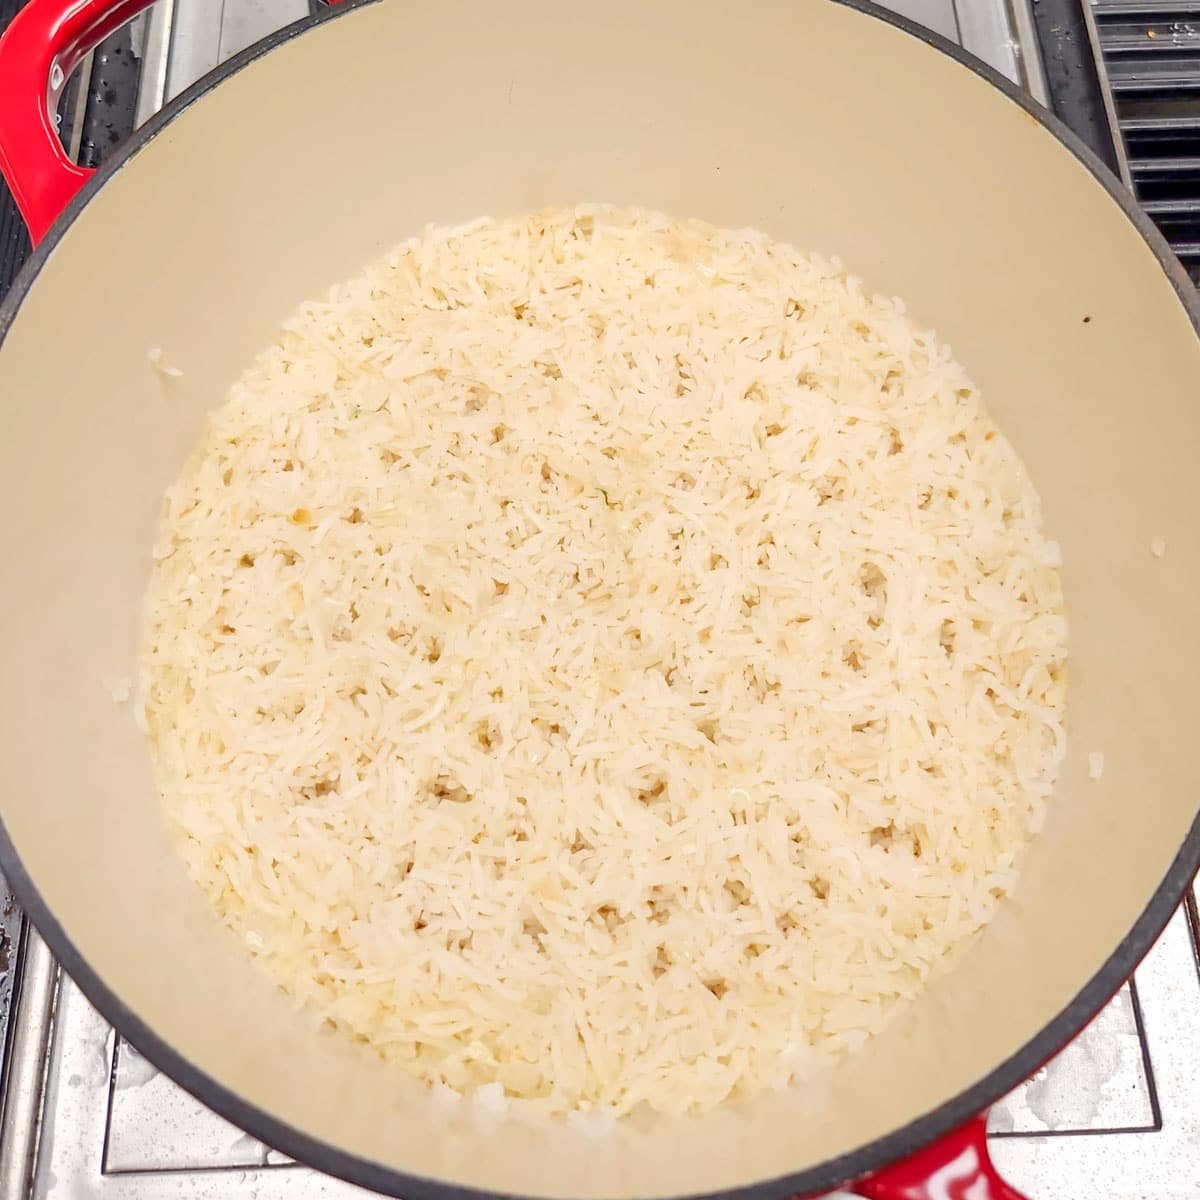 basmati rice that has been cooked in broth